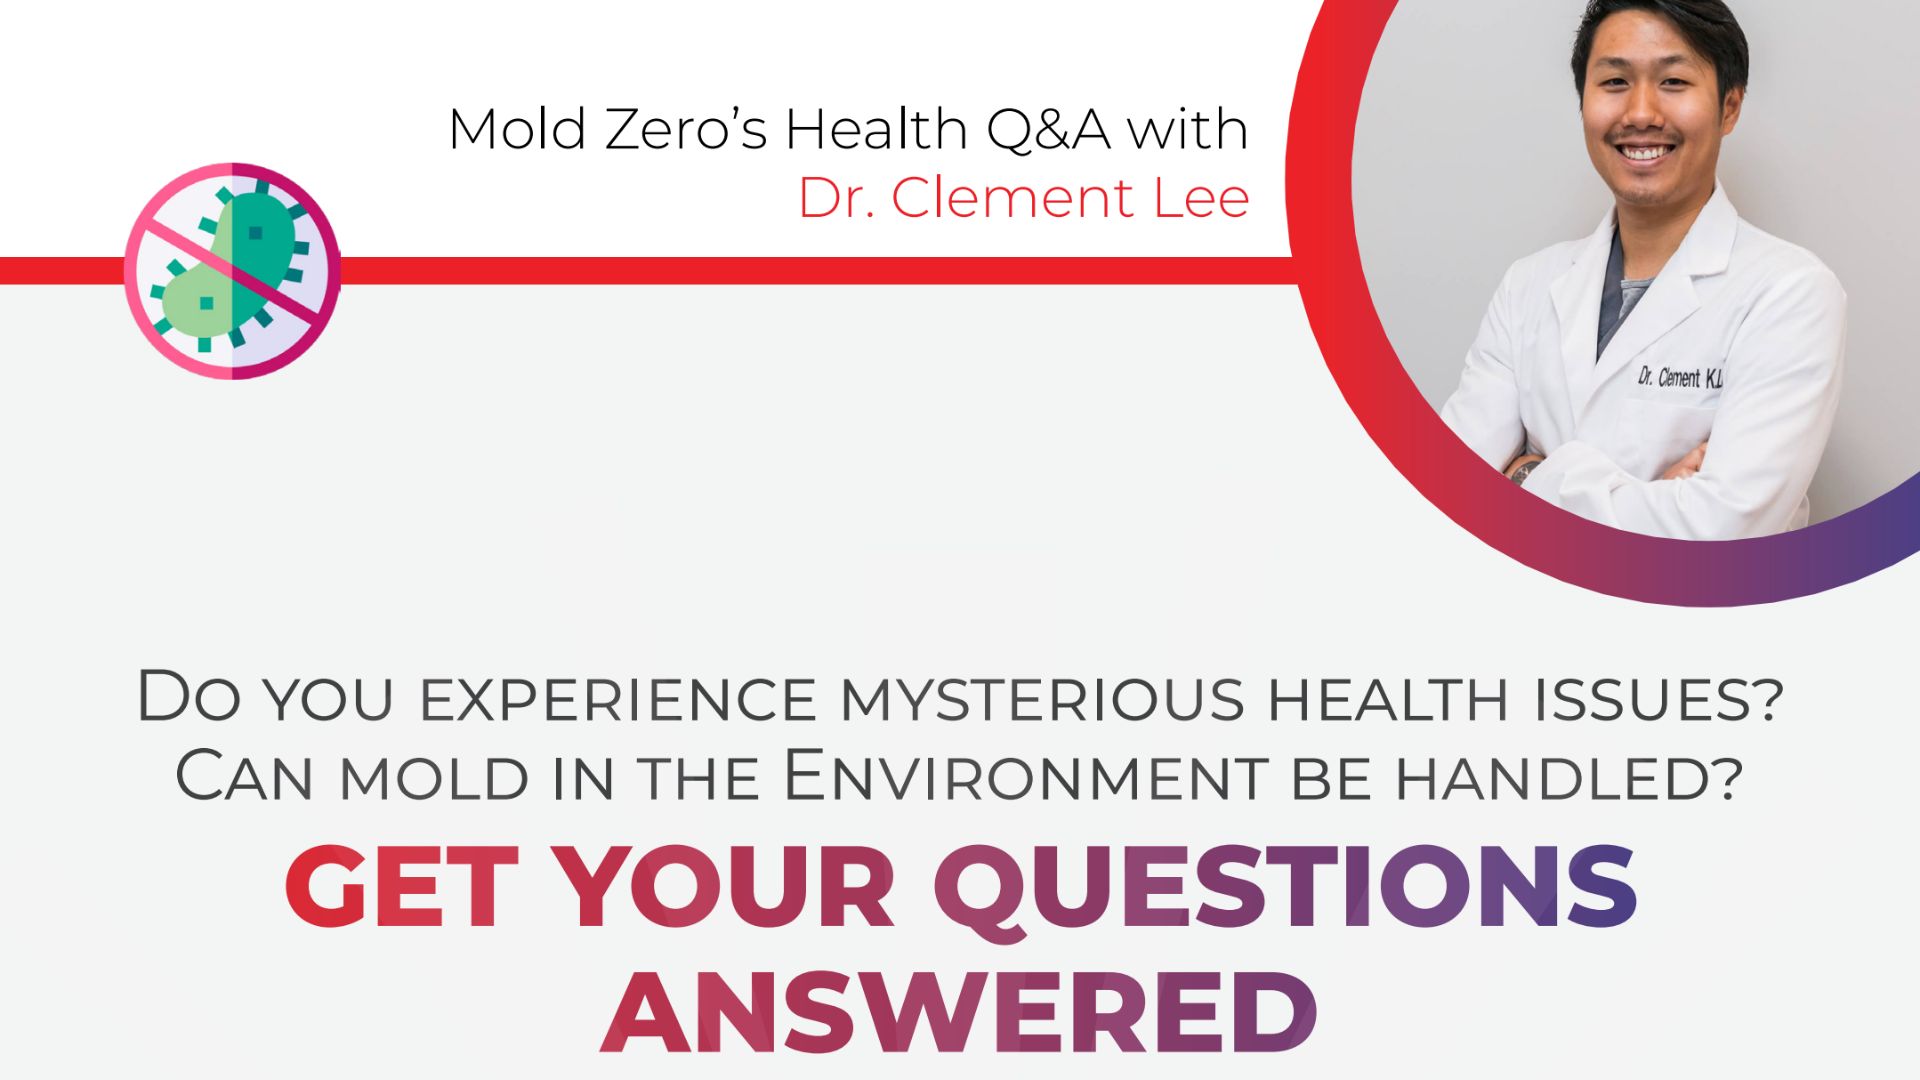 https://moldzerollc.com/wp-content/uploads/2023/05/Dr-Clement-and-Mold-Zero-answer-your-mold-related-health-questions.jpg